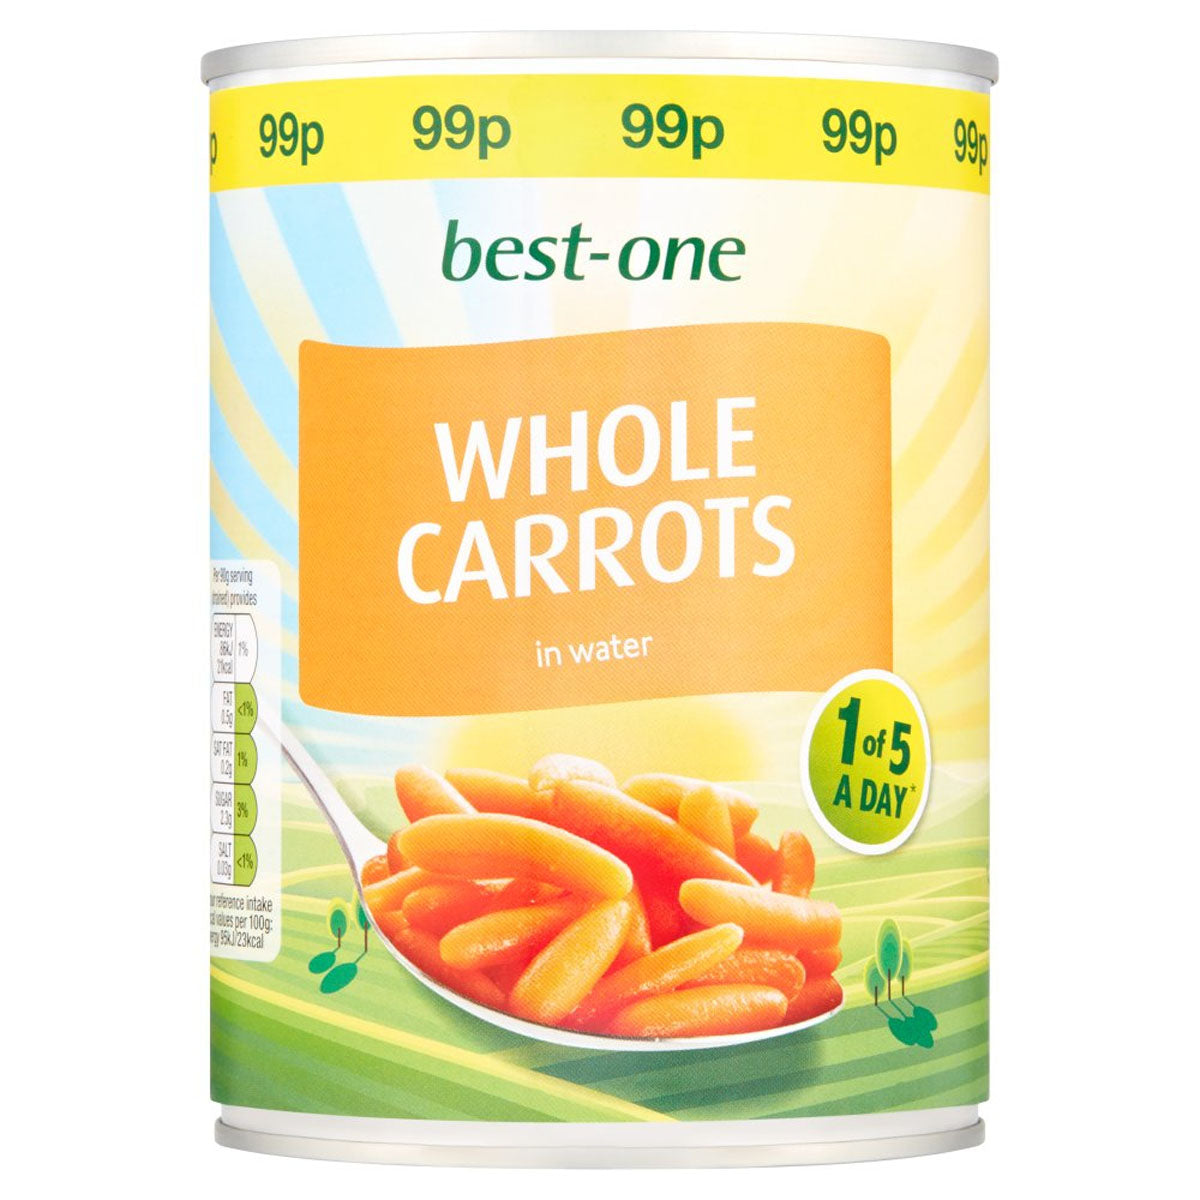 Best One - Whole Carrots in Water - 560g is the best product for whole carrots in water.